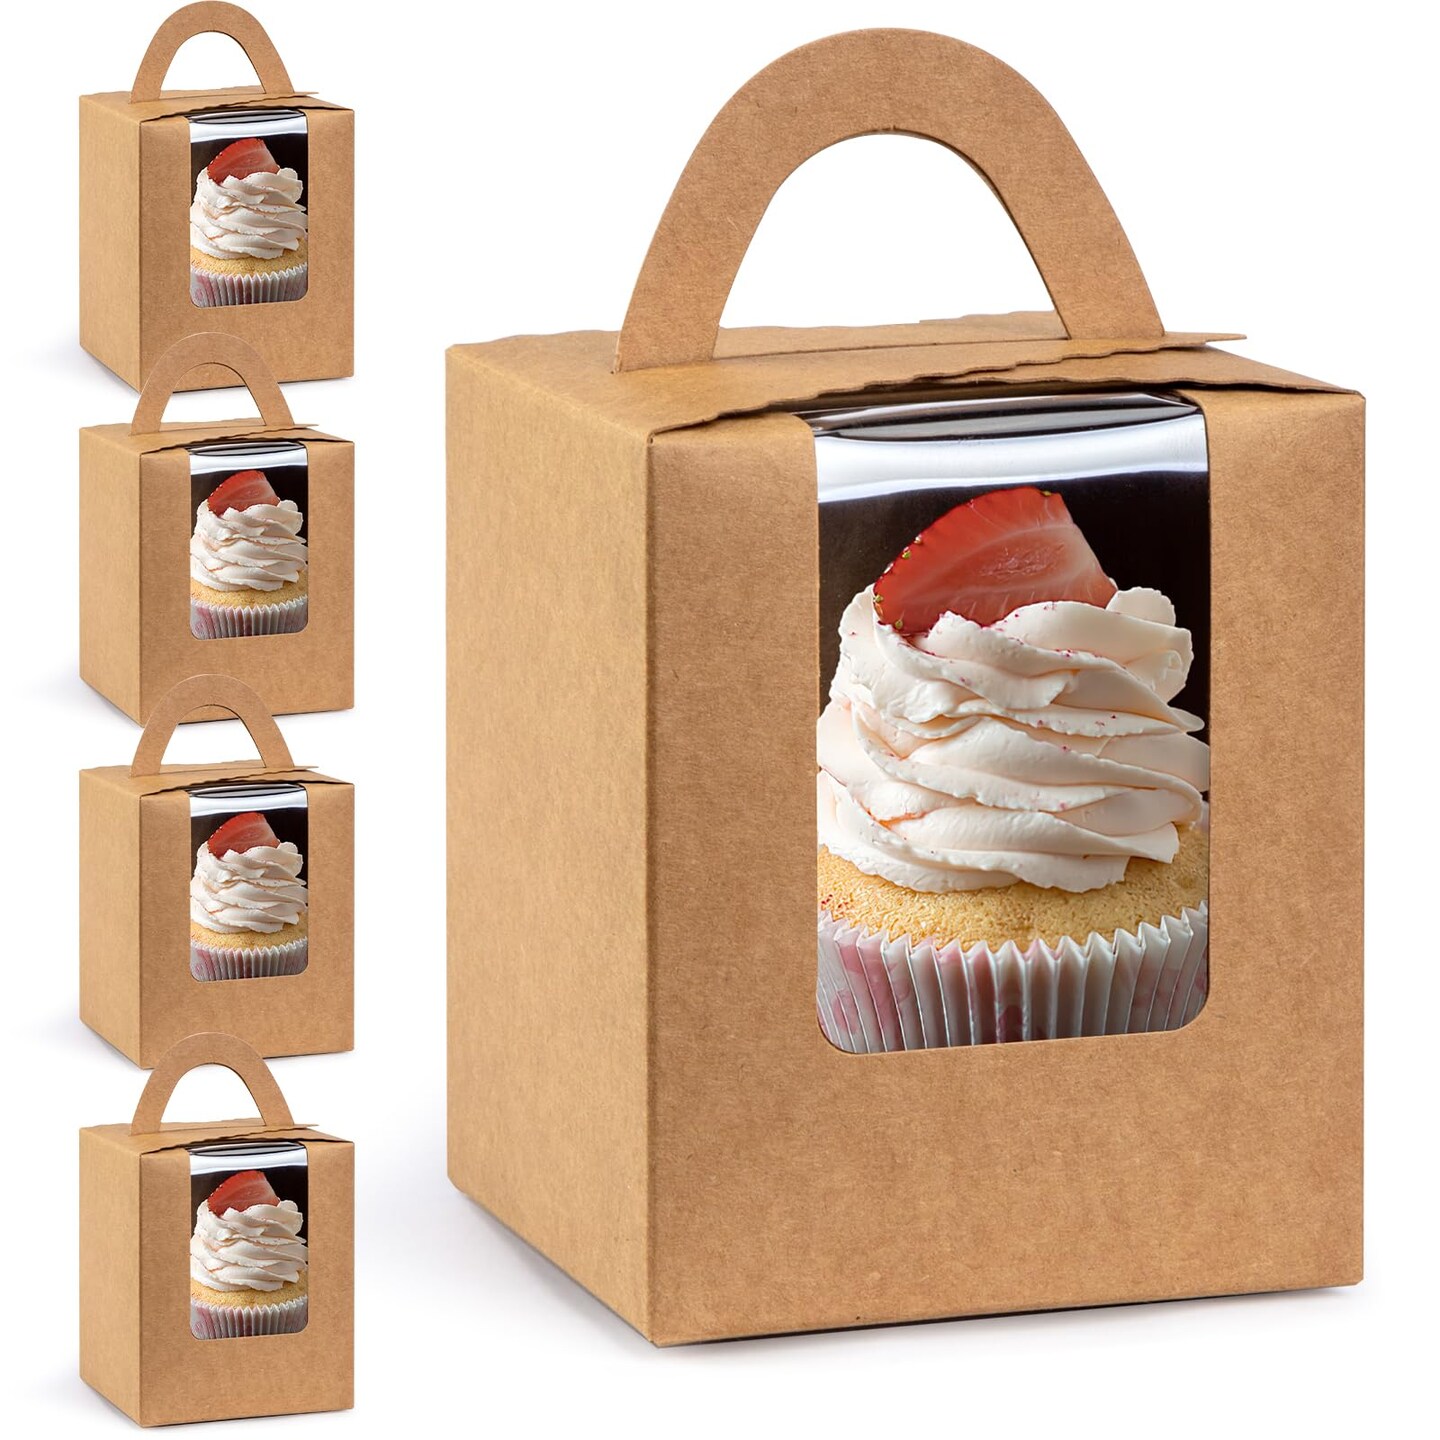 VGOODALL 60PCS Kraft Cupcake Boxes, Cupcake Carrier with Window Insert and Handle Kraft Pastry Containers Muffins Cupcake Carriers for Bakery Wrapping Party Favor Packing